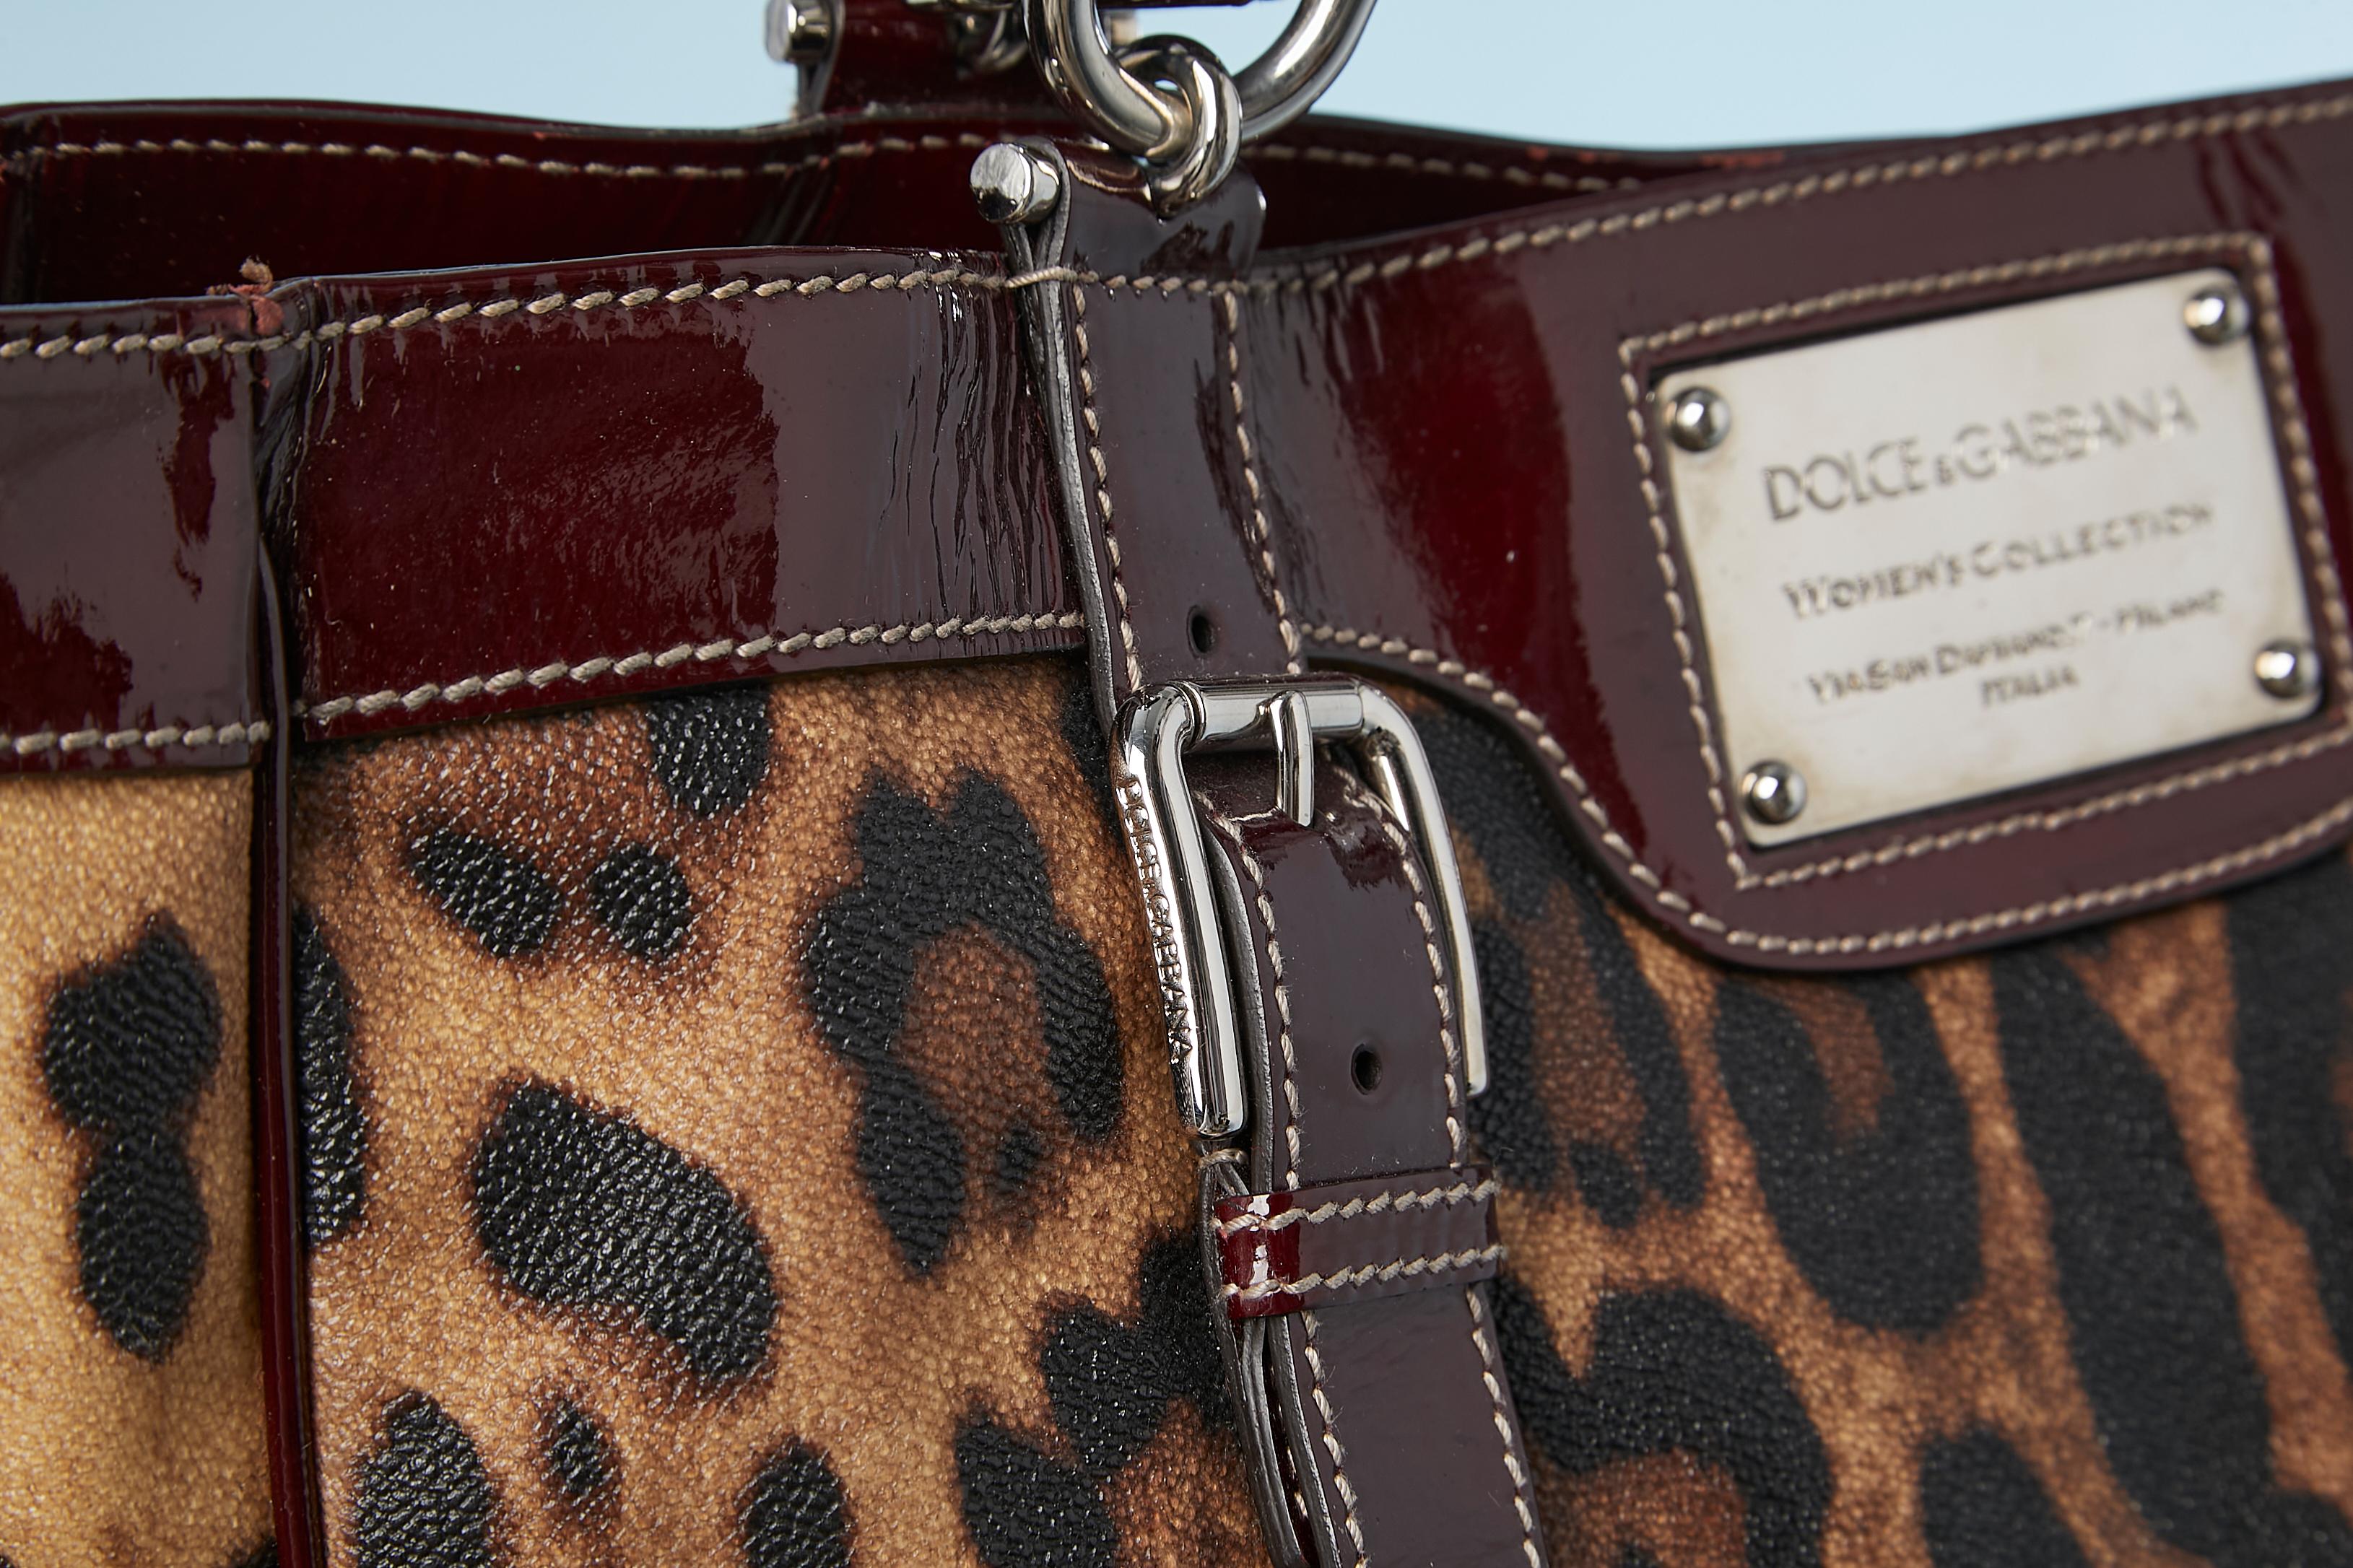 Coated leopard printed canevas and burgundypatent leather details Dolce Gabbana  For Sale 2